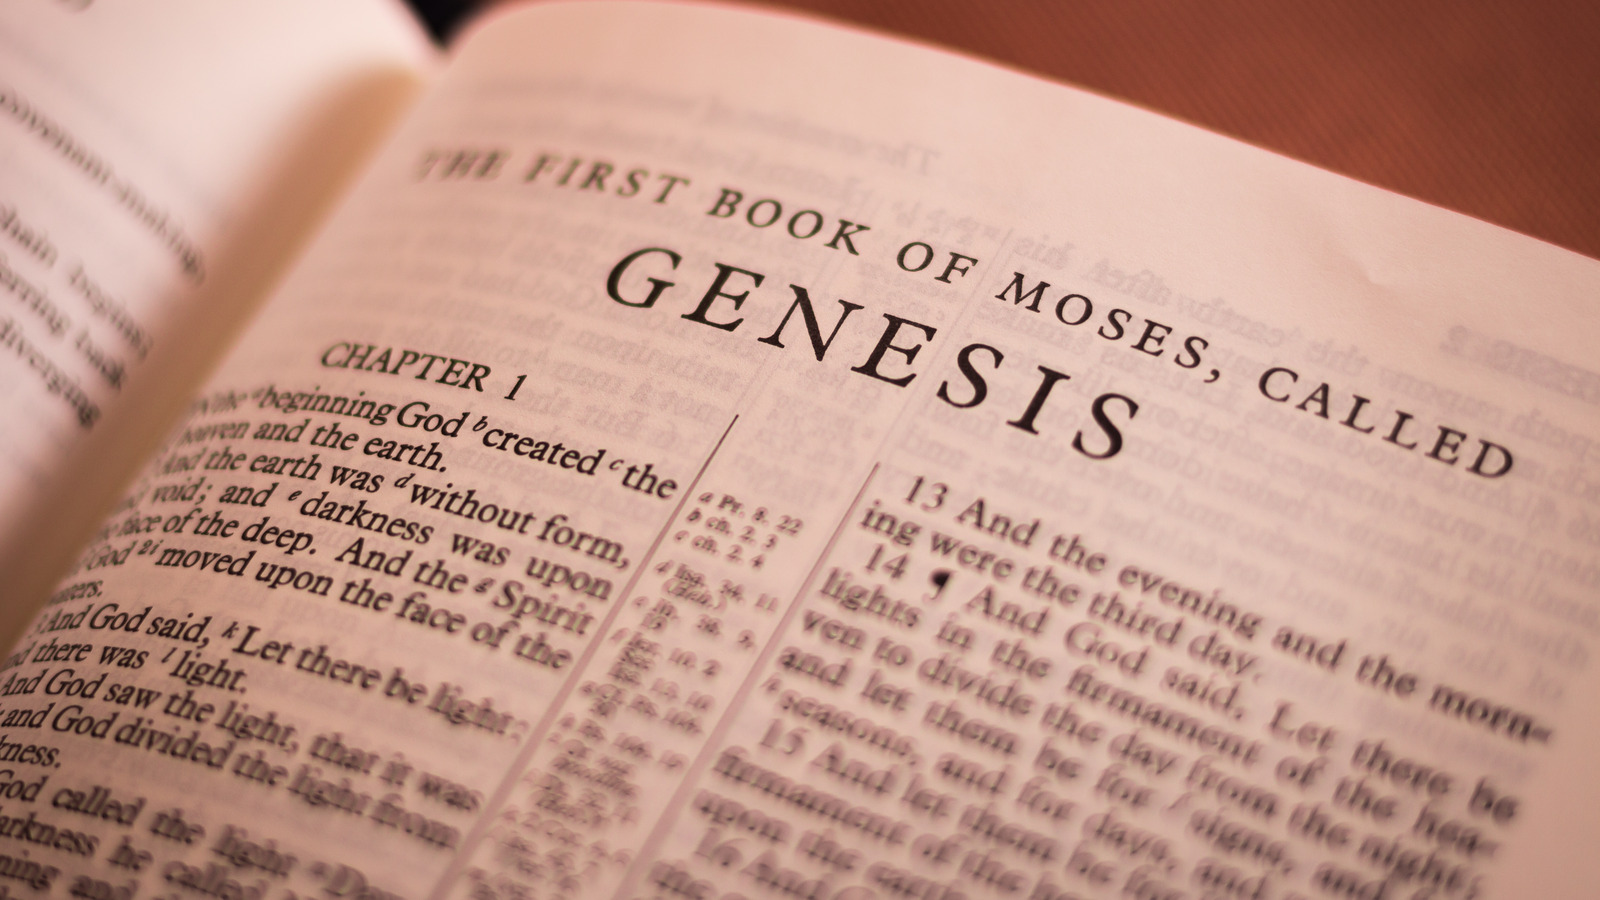 Page of Genesis in the bible